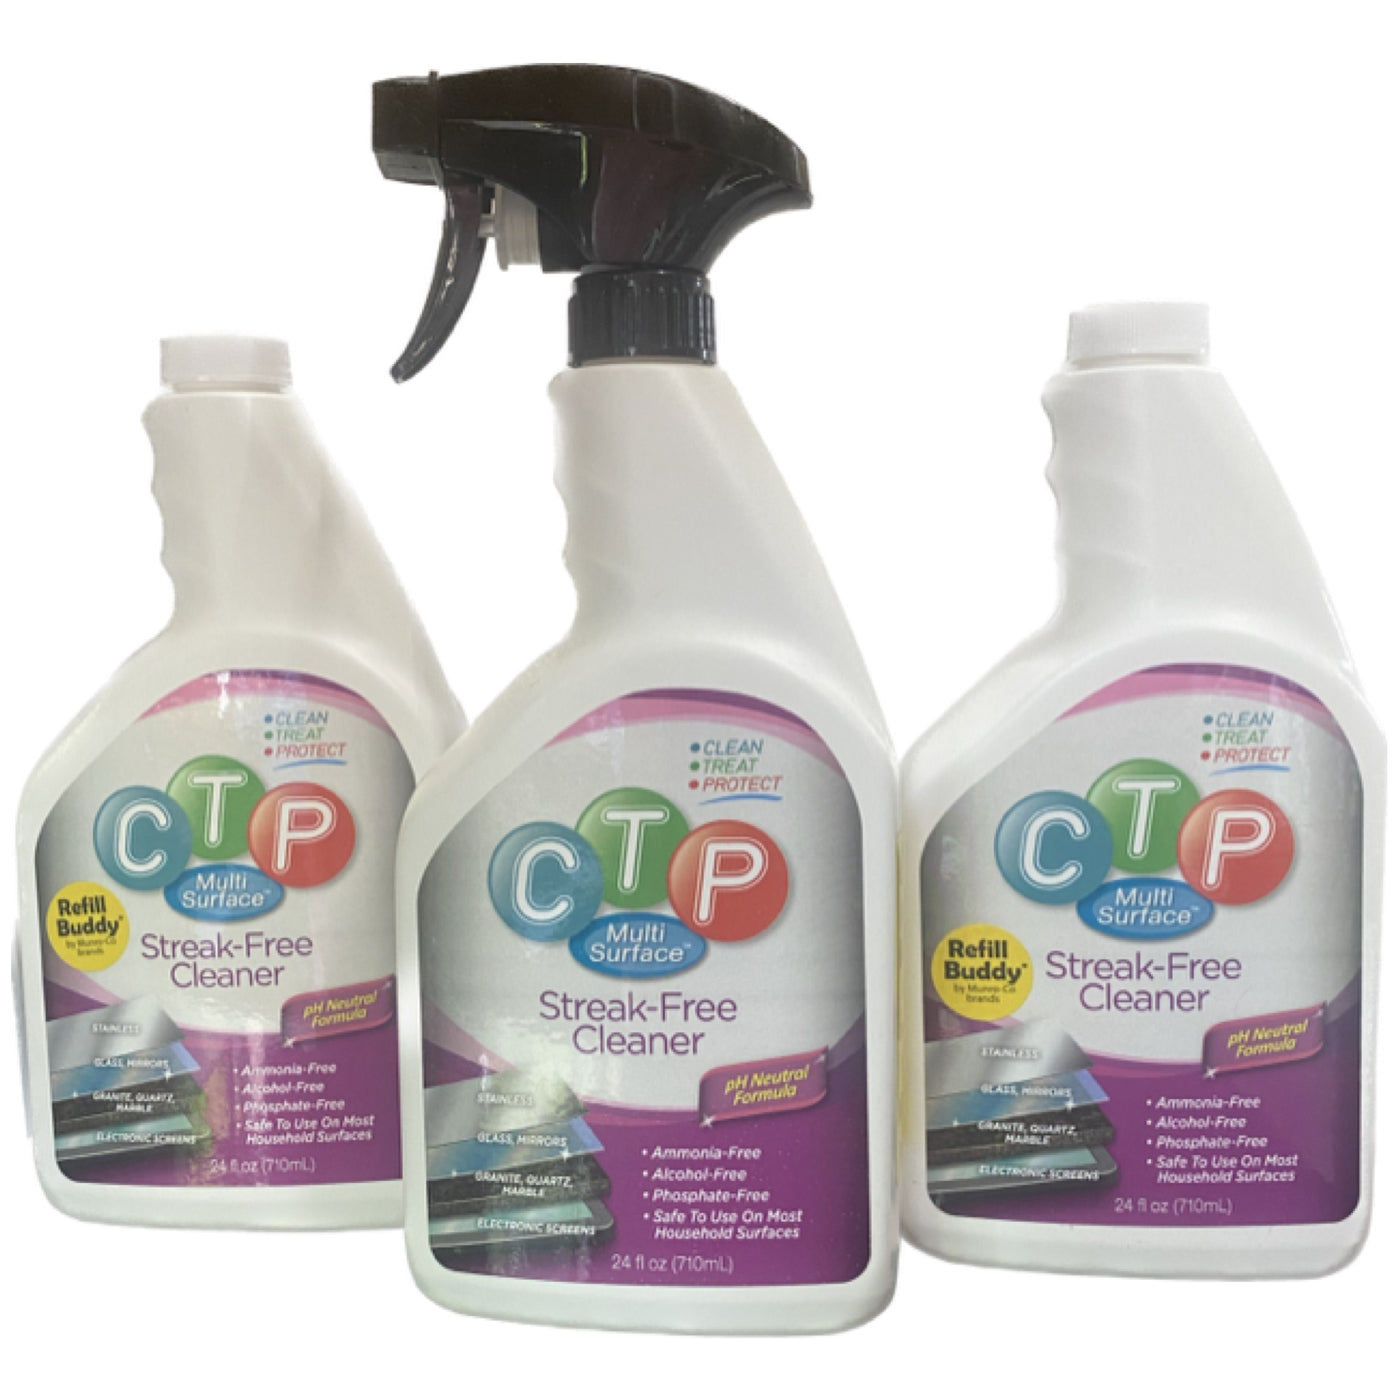 CTP Multi-Surface, Streak-Free, pH Neutral Cleaners